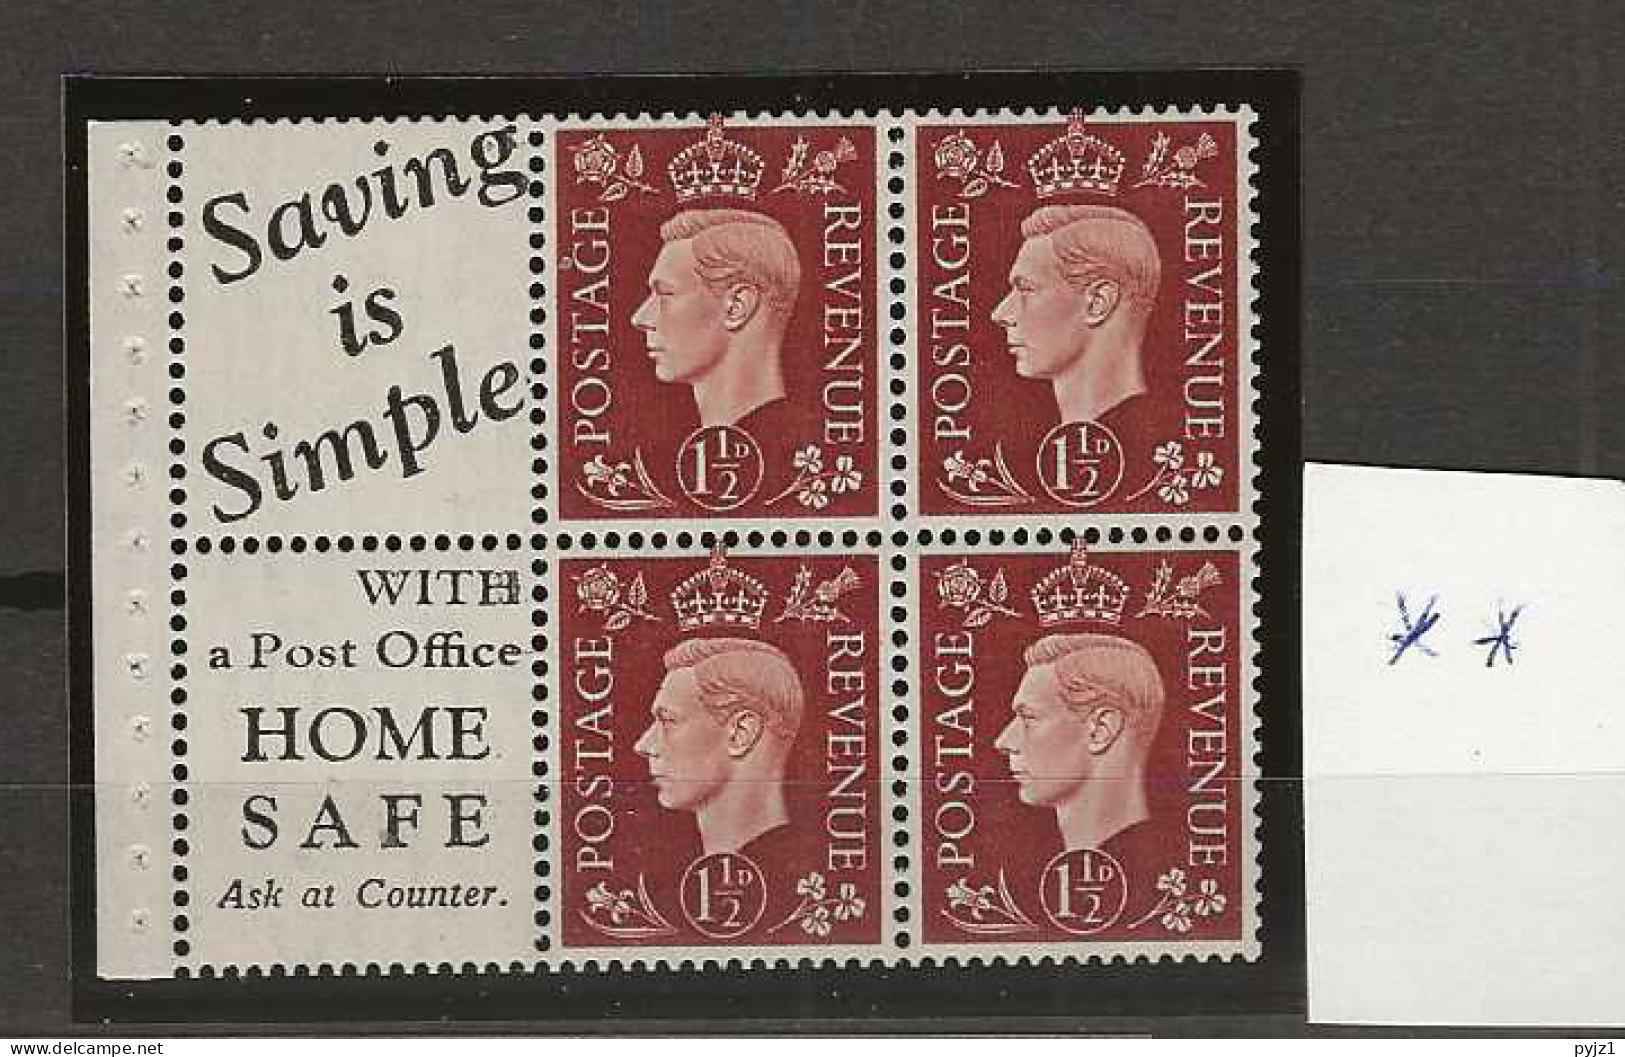 1937 MNH GB, Booklet Pane With Selfedge - Ungebraucht